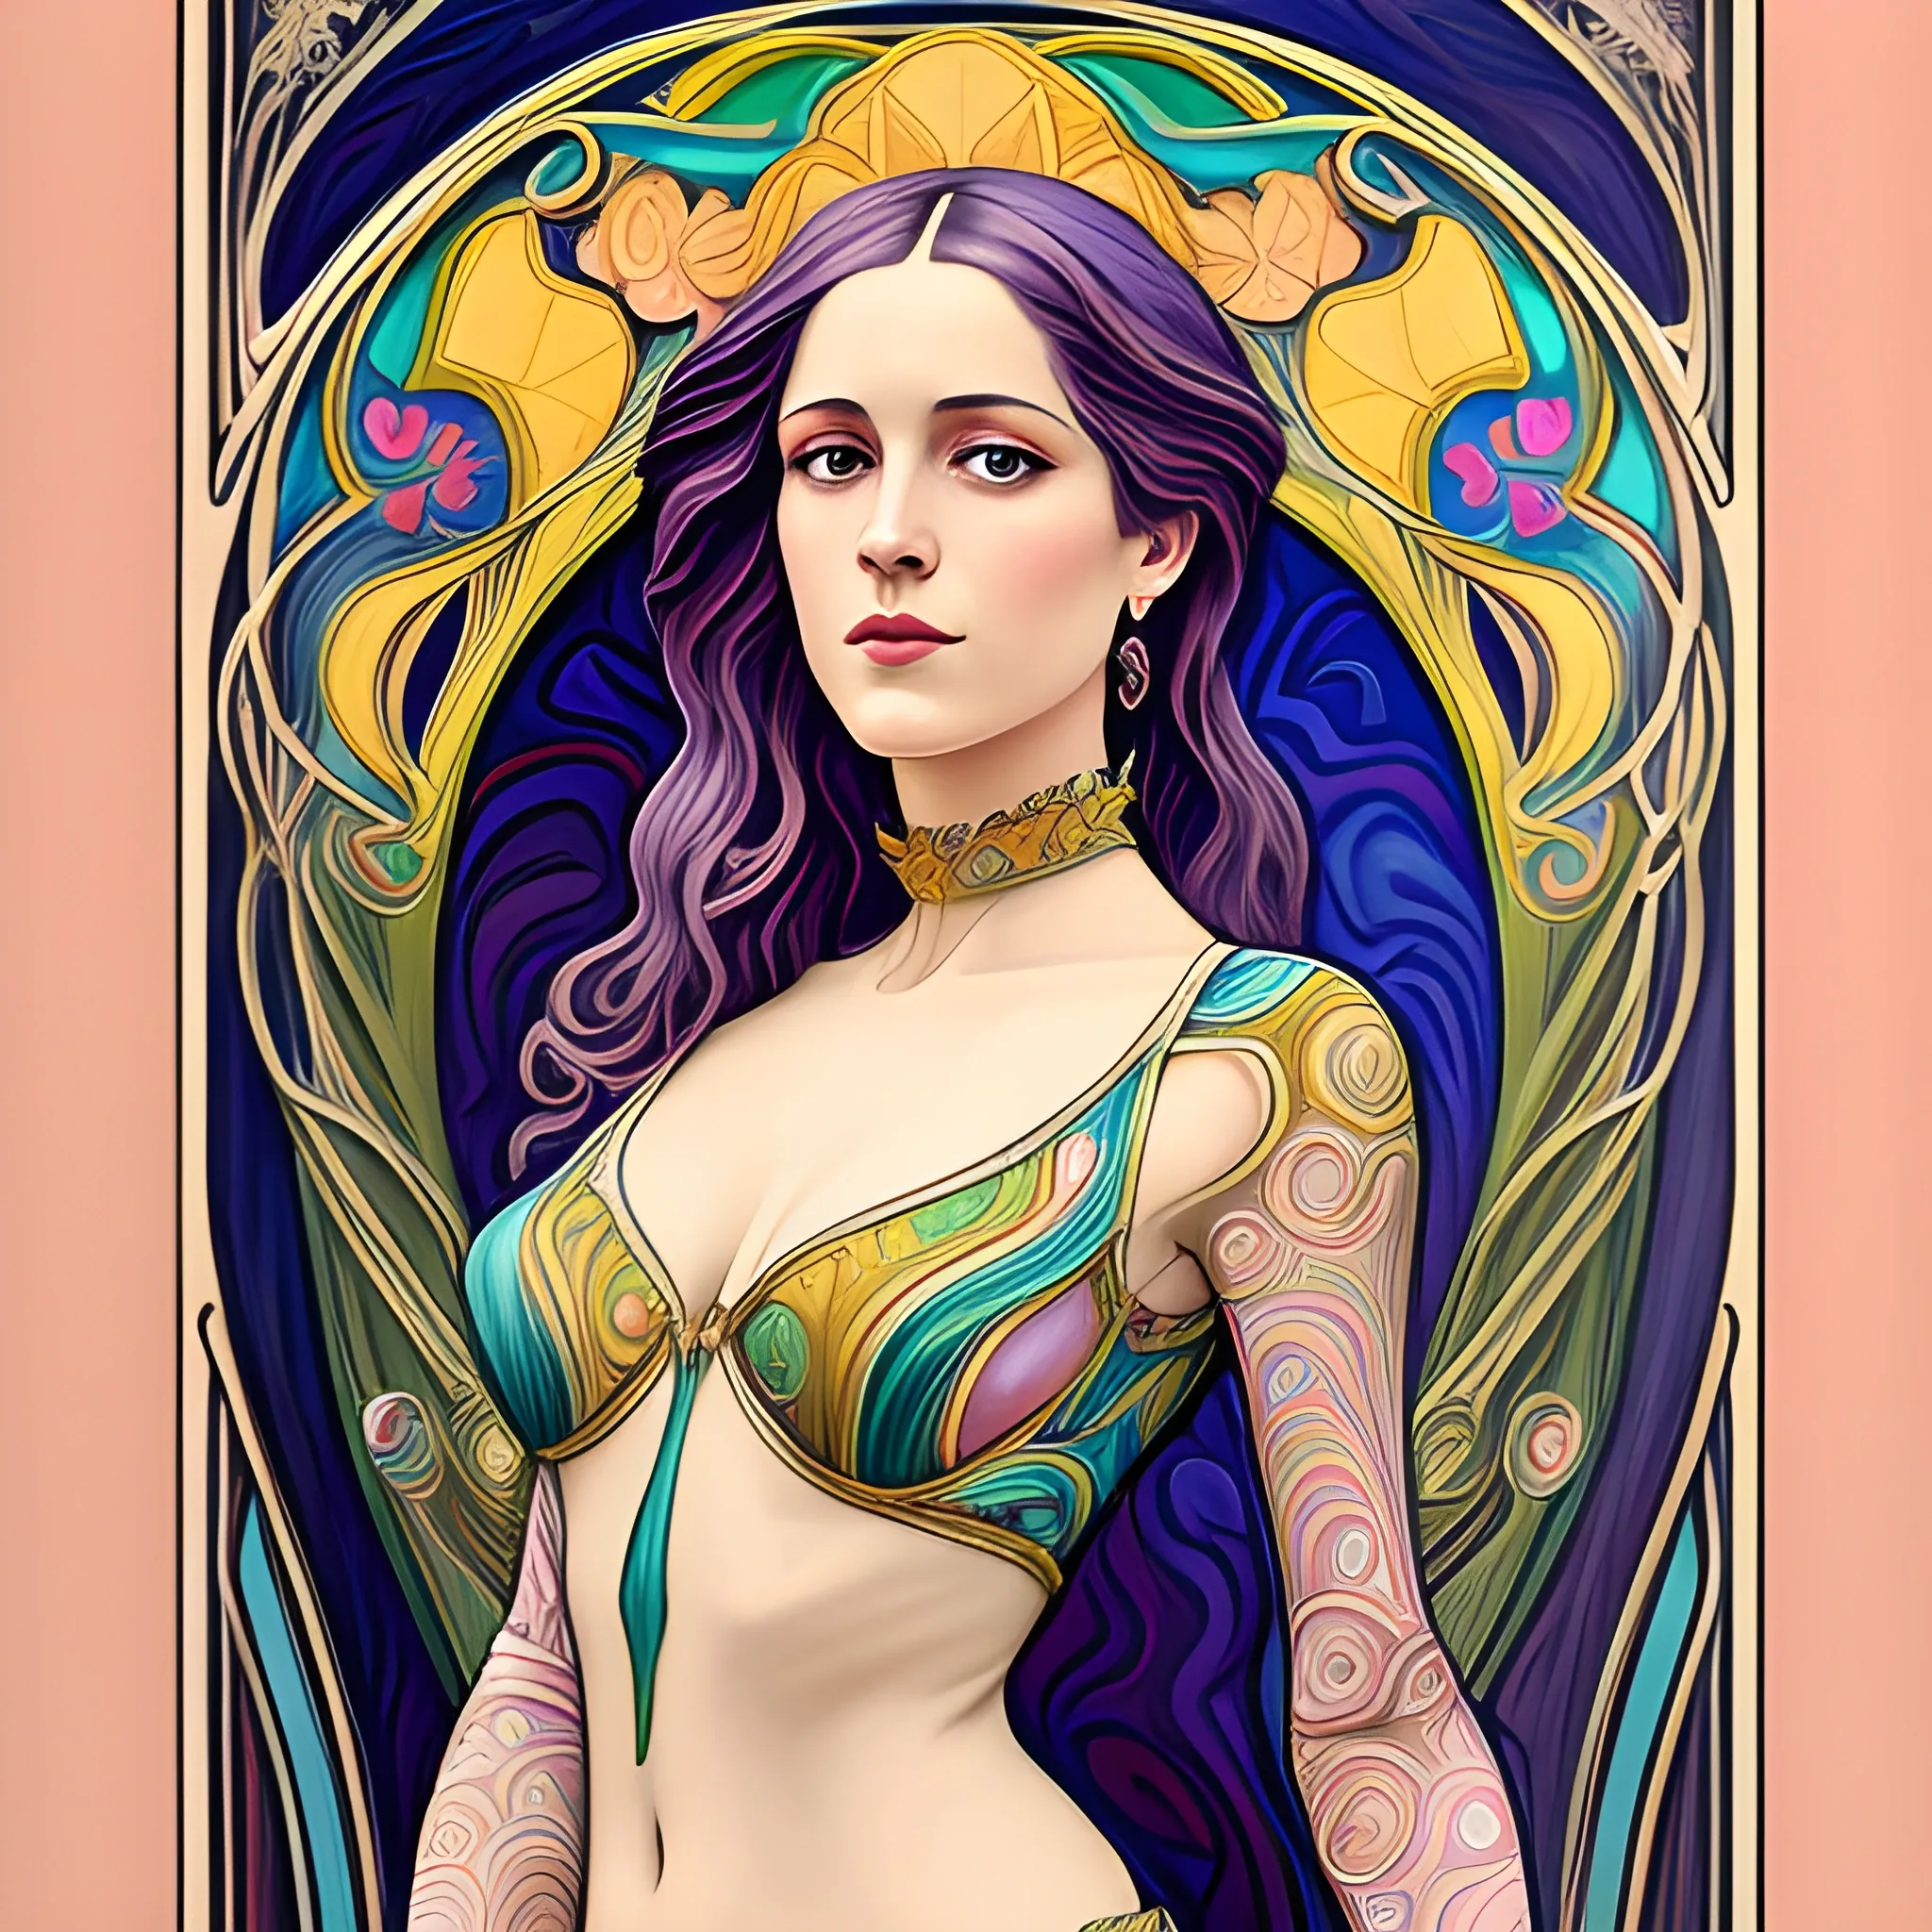 Art Nouveau painting, true aesthetics, stylish fashion shot of a beautiful woman posing in front of a psychedelic art nouveau style. Highly detailed, highest quality, Oil Painting, Pencil Sketch